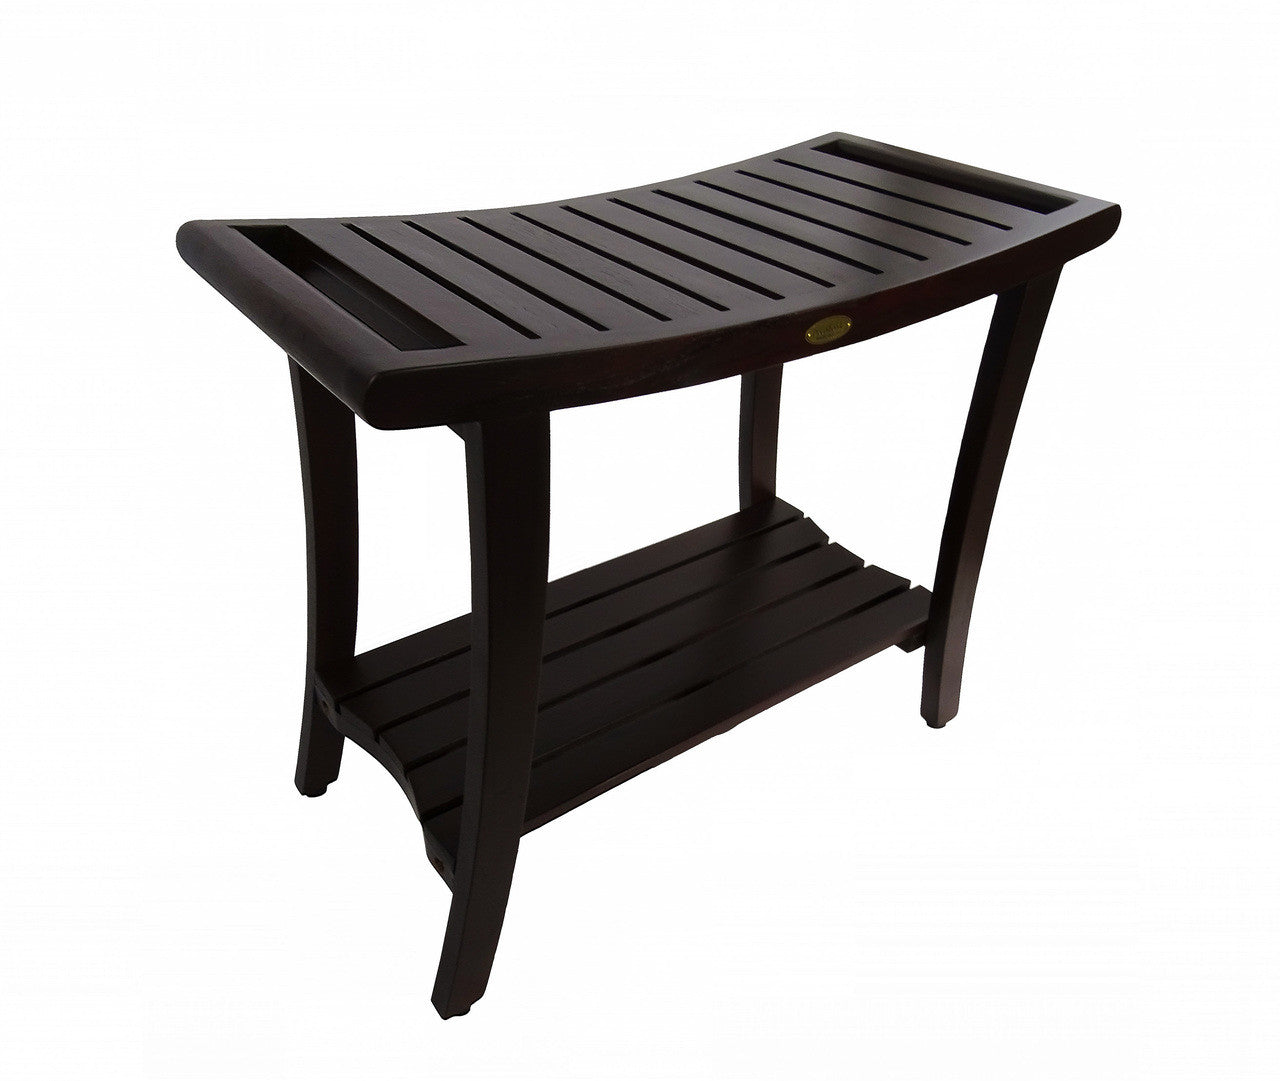 DecoTeak® Harmony® 30"L Teak Wood Bench with Shelf and LiftAide Arms in Woodland Brown Finish